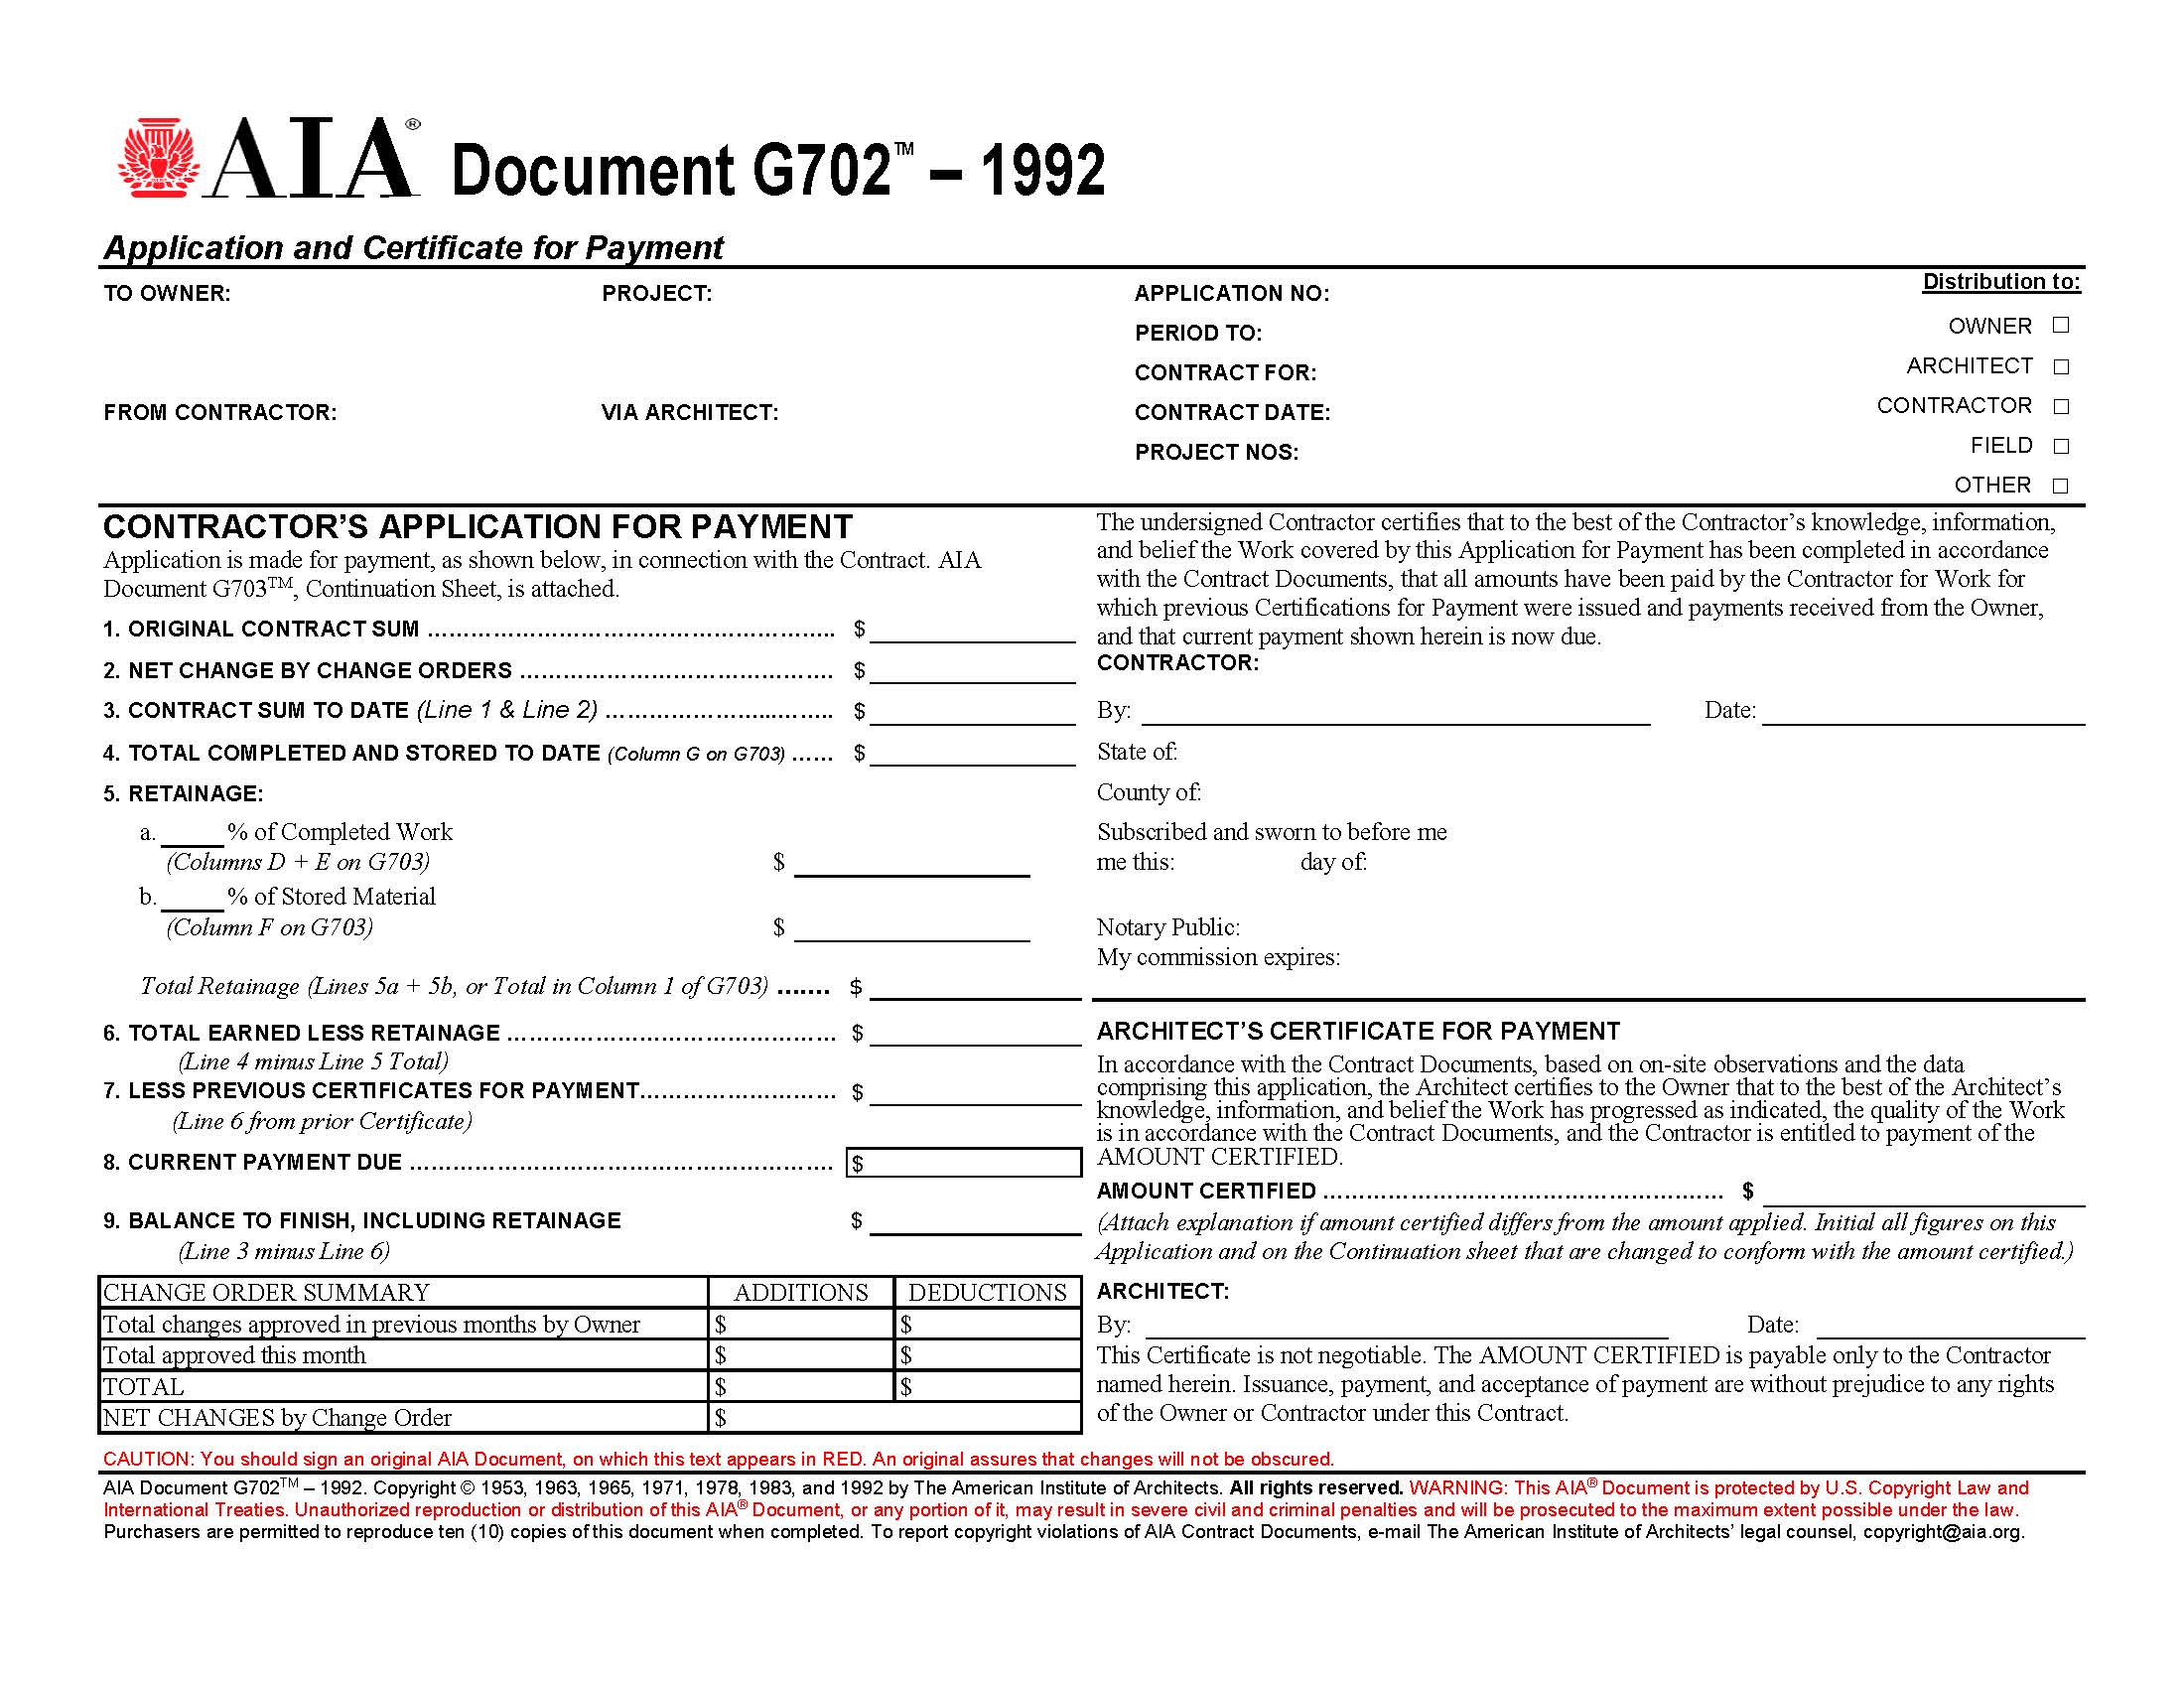 Image of, and link to, AIA G702/G703 form